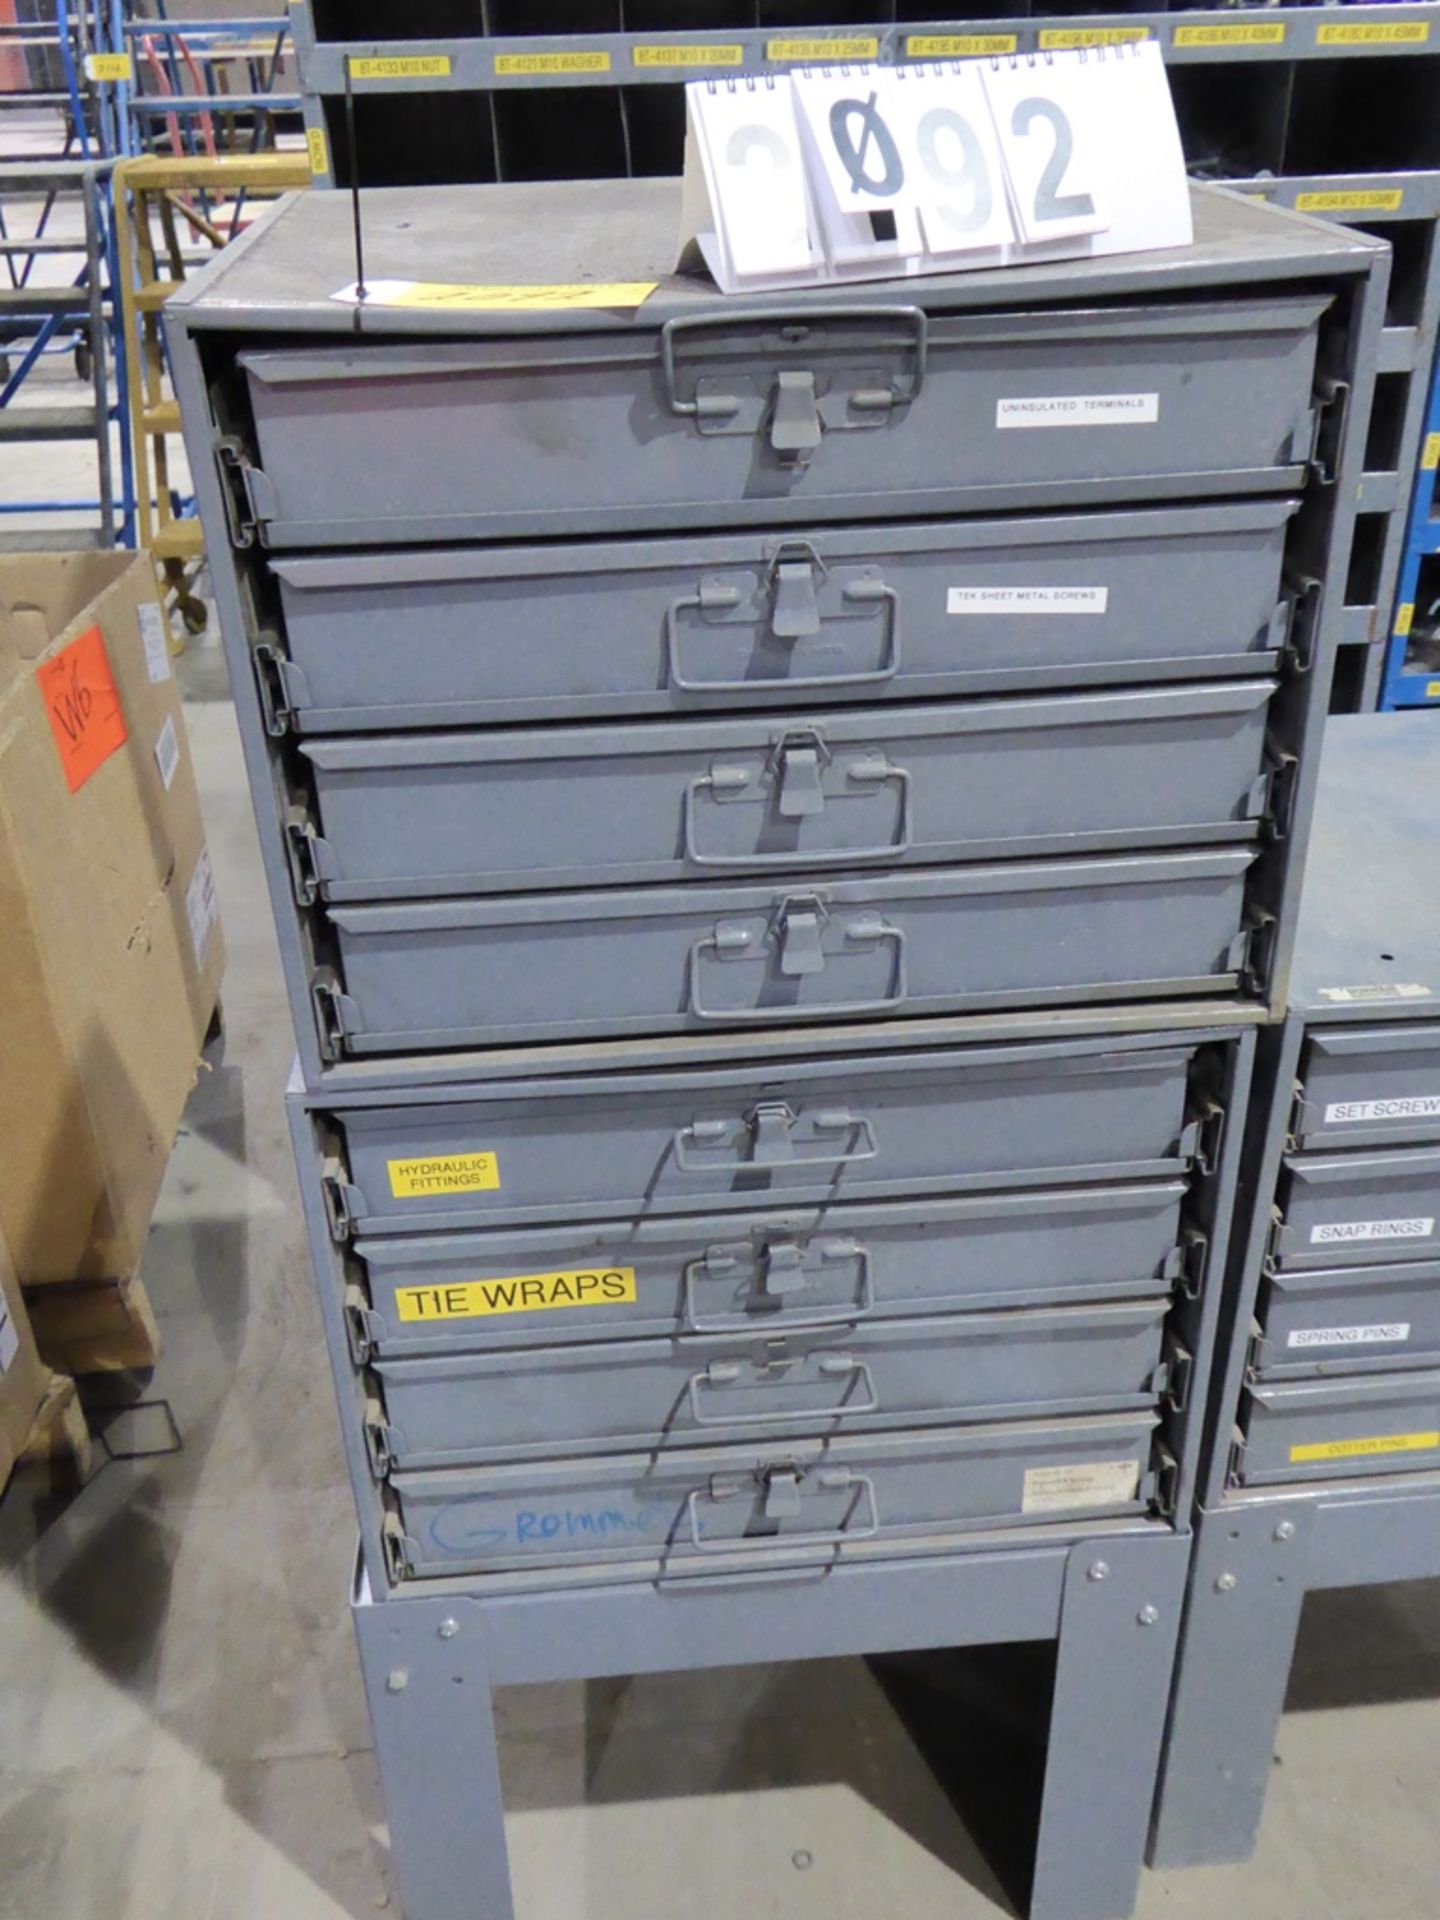 DURHAM PULL TRAY PARTS BINS & CONTENTS 8 TRAYS